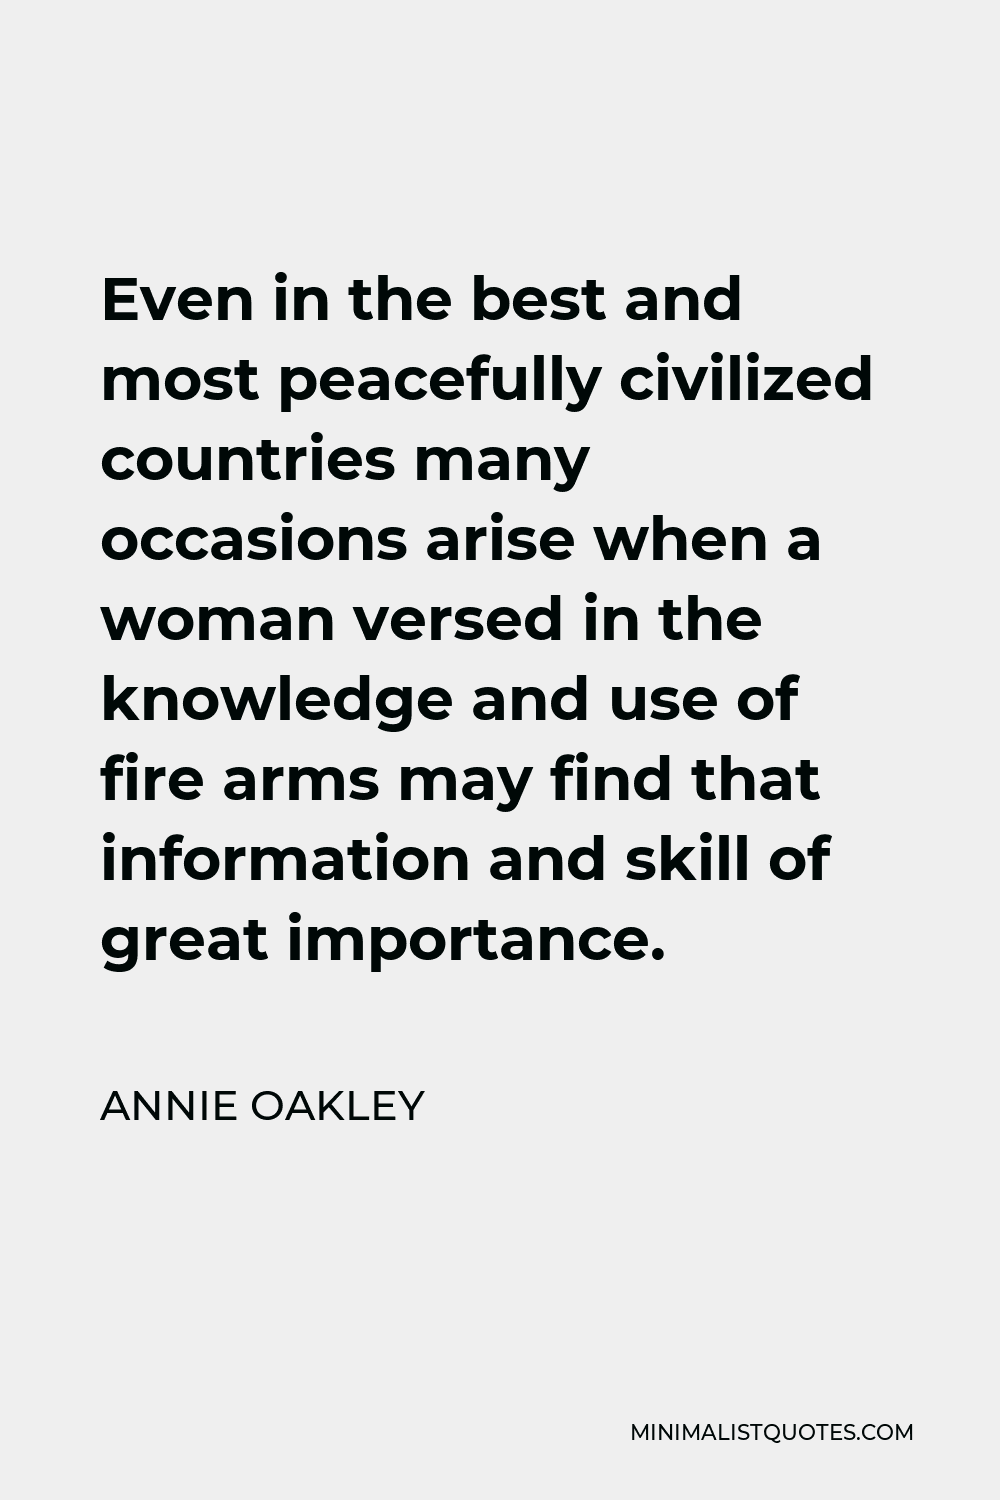 Annie Oakley Quote - Even in the best and most peacefully civilized countries many occasions arise when a woman versed in the knowledge and use of fire arms may find that information and skill of great importance.